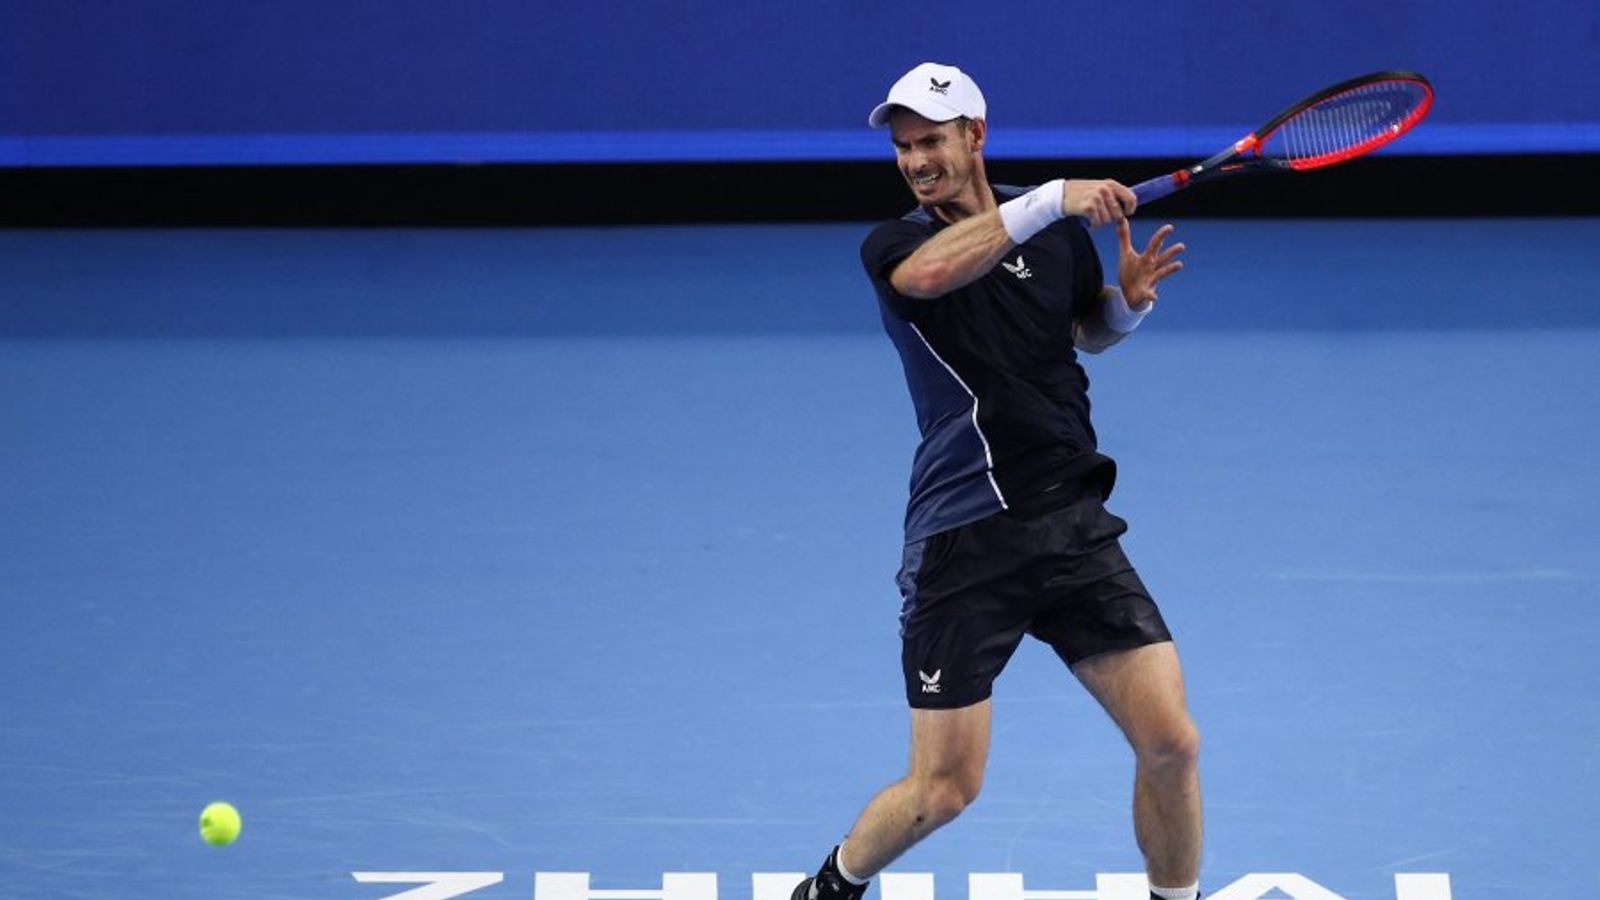 Andy Murray crashes out in last 16 of Zhuhai Championships with defeat to Aslan Karatsev Tennis News Sky Sports